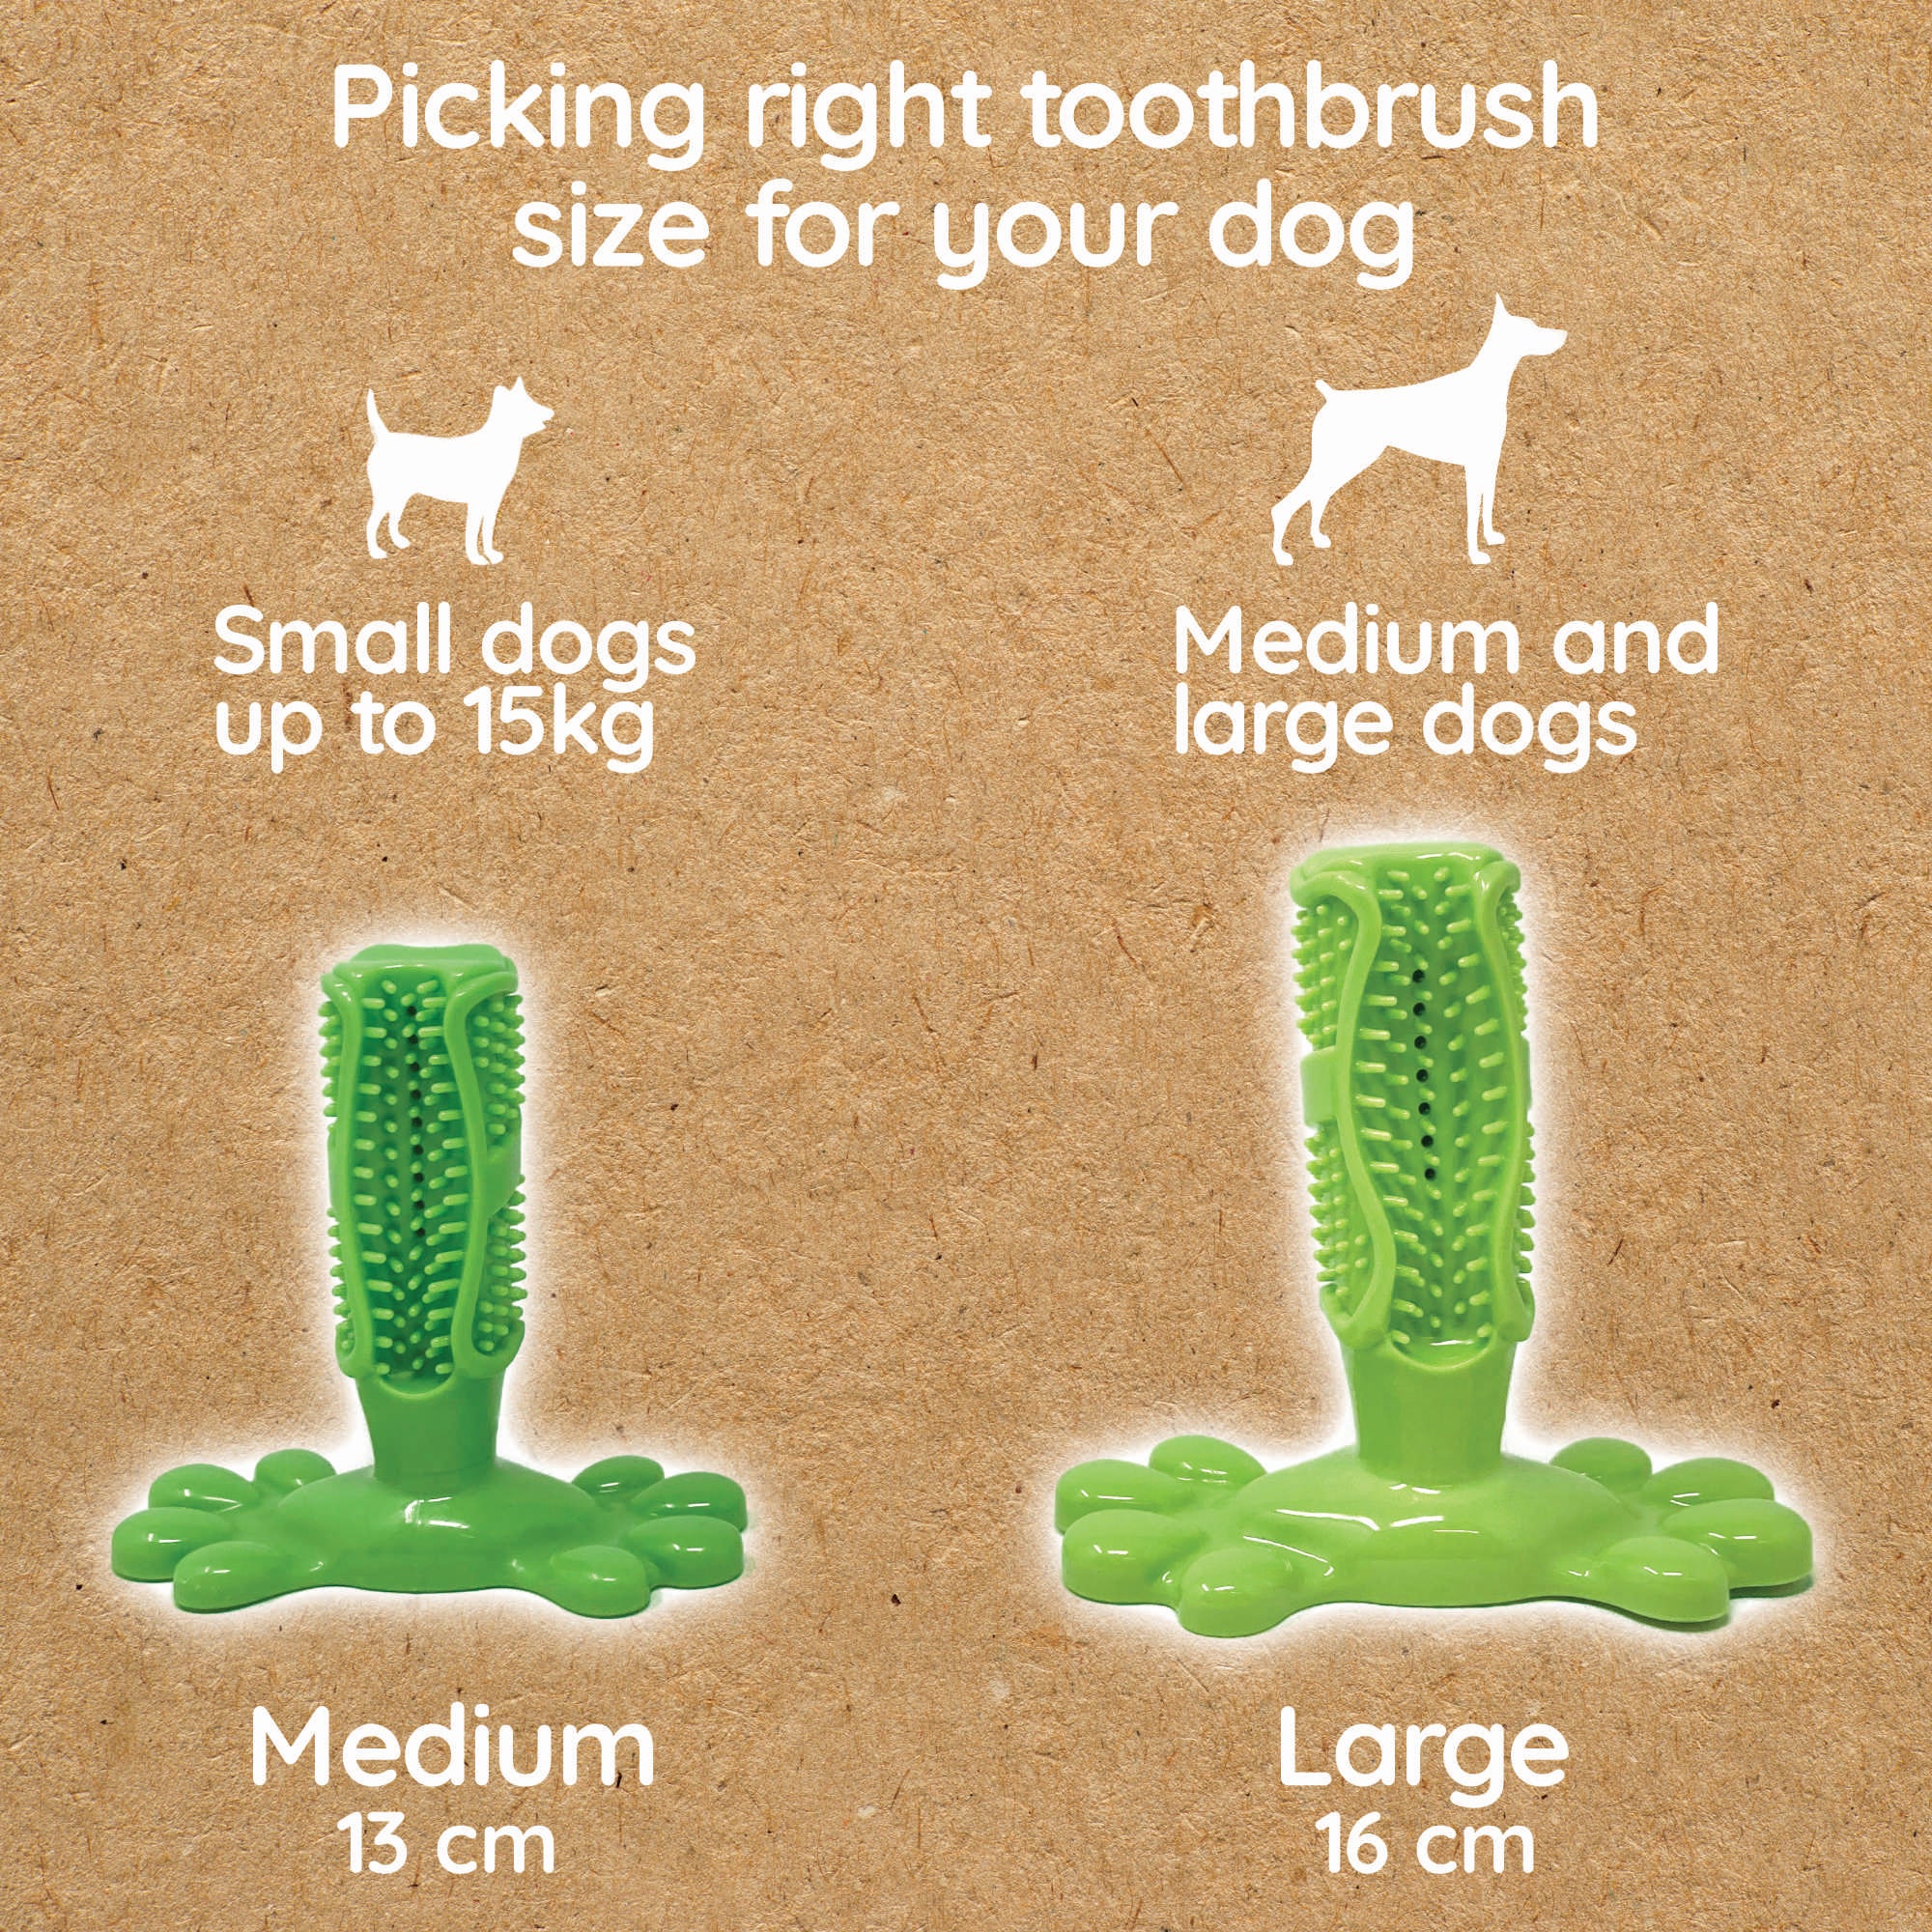 Cool Paws Toothbrush Toy